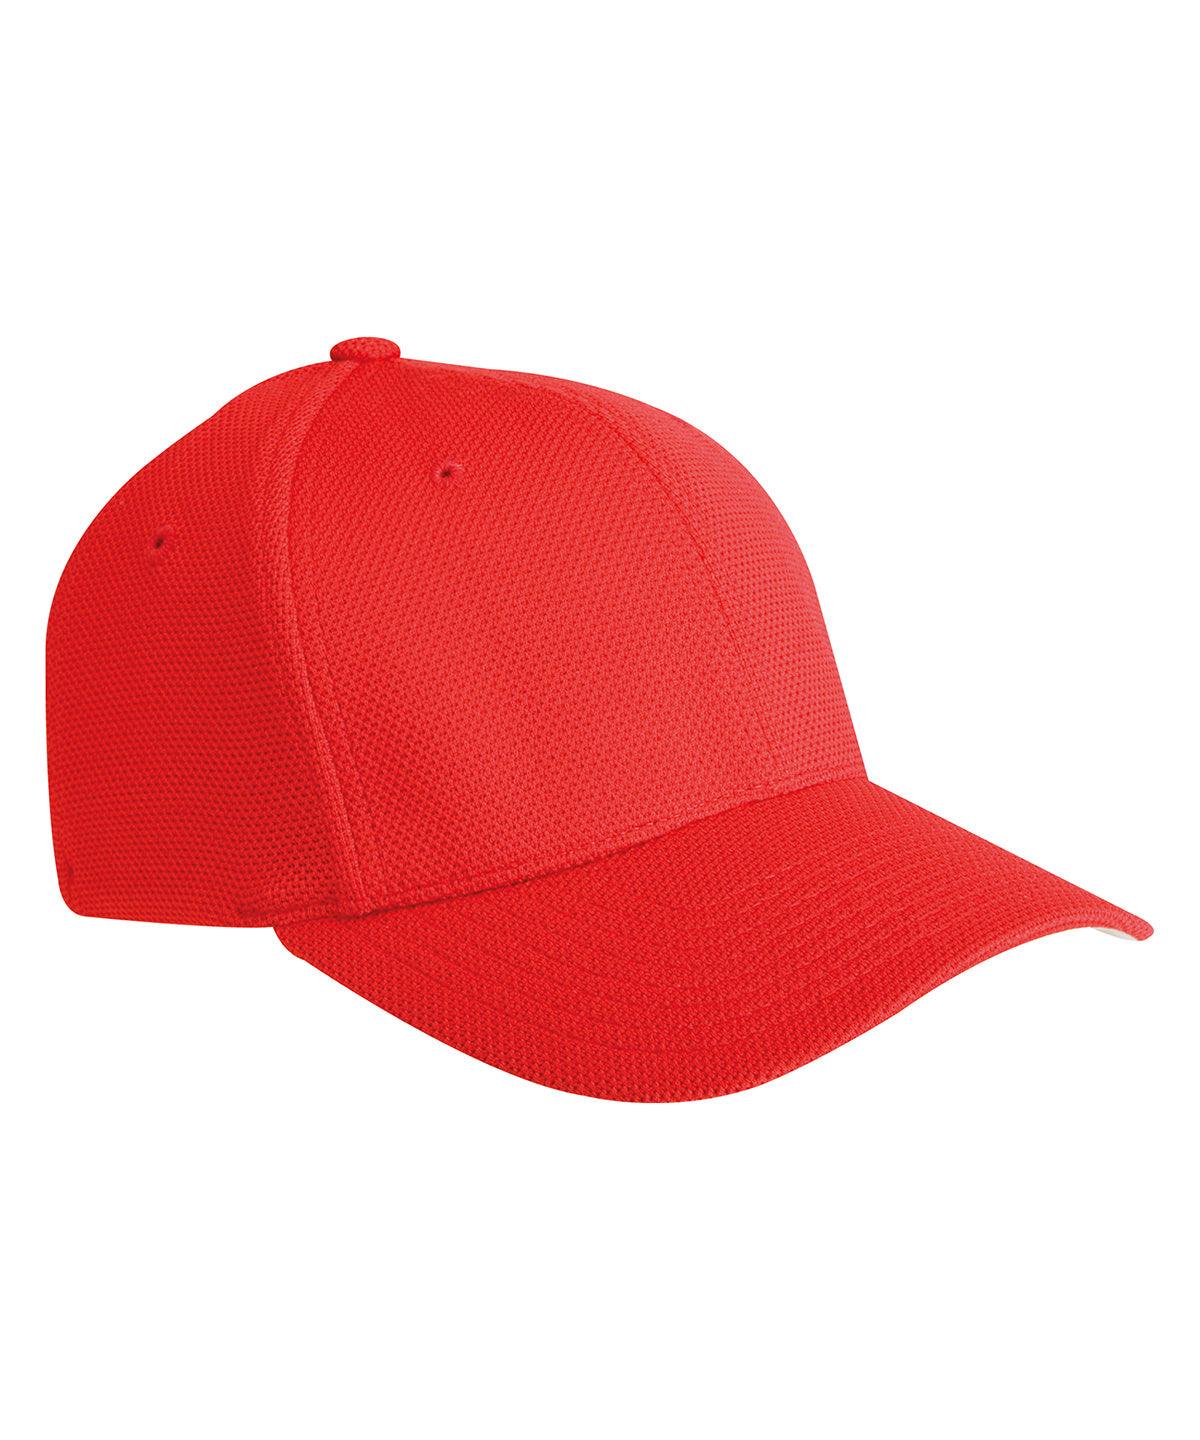 Red - Flexfit cool and dry piqué mesh (6577CD) Caps Flexfit by Yupoong Headwear, Rebrandable Schoolwear Centres